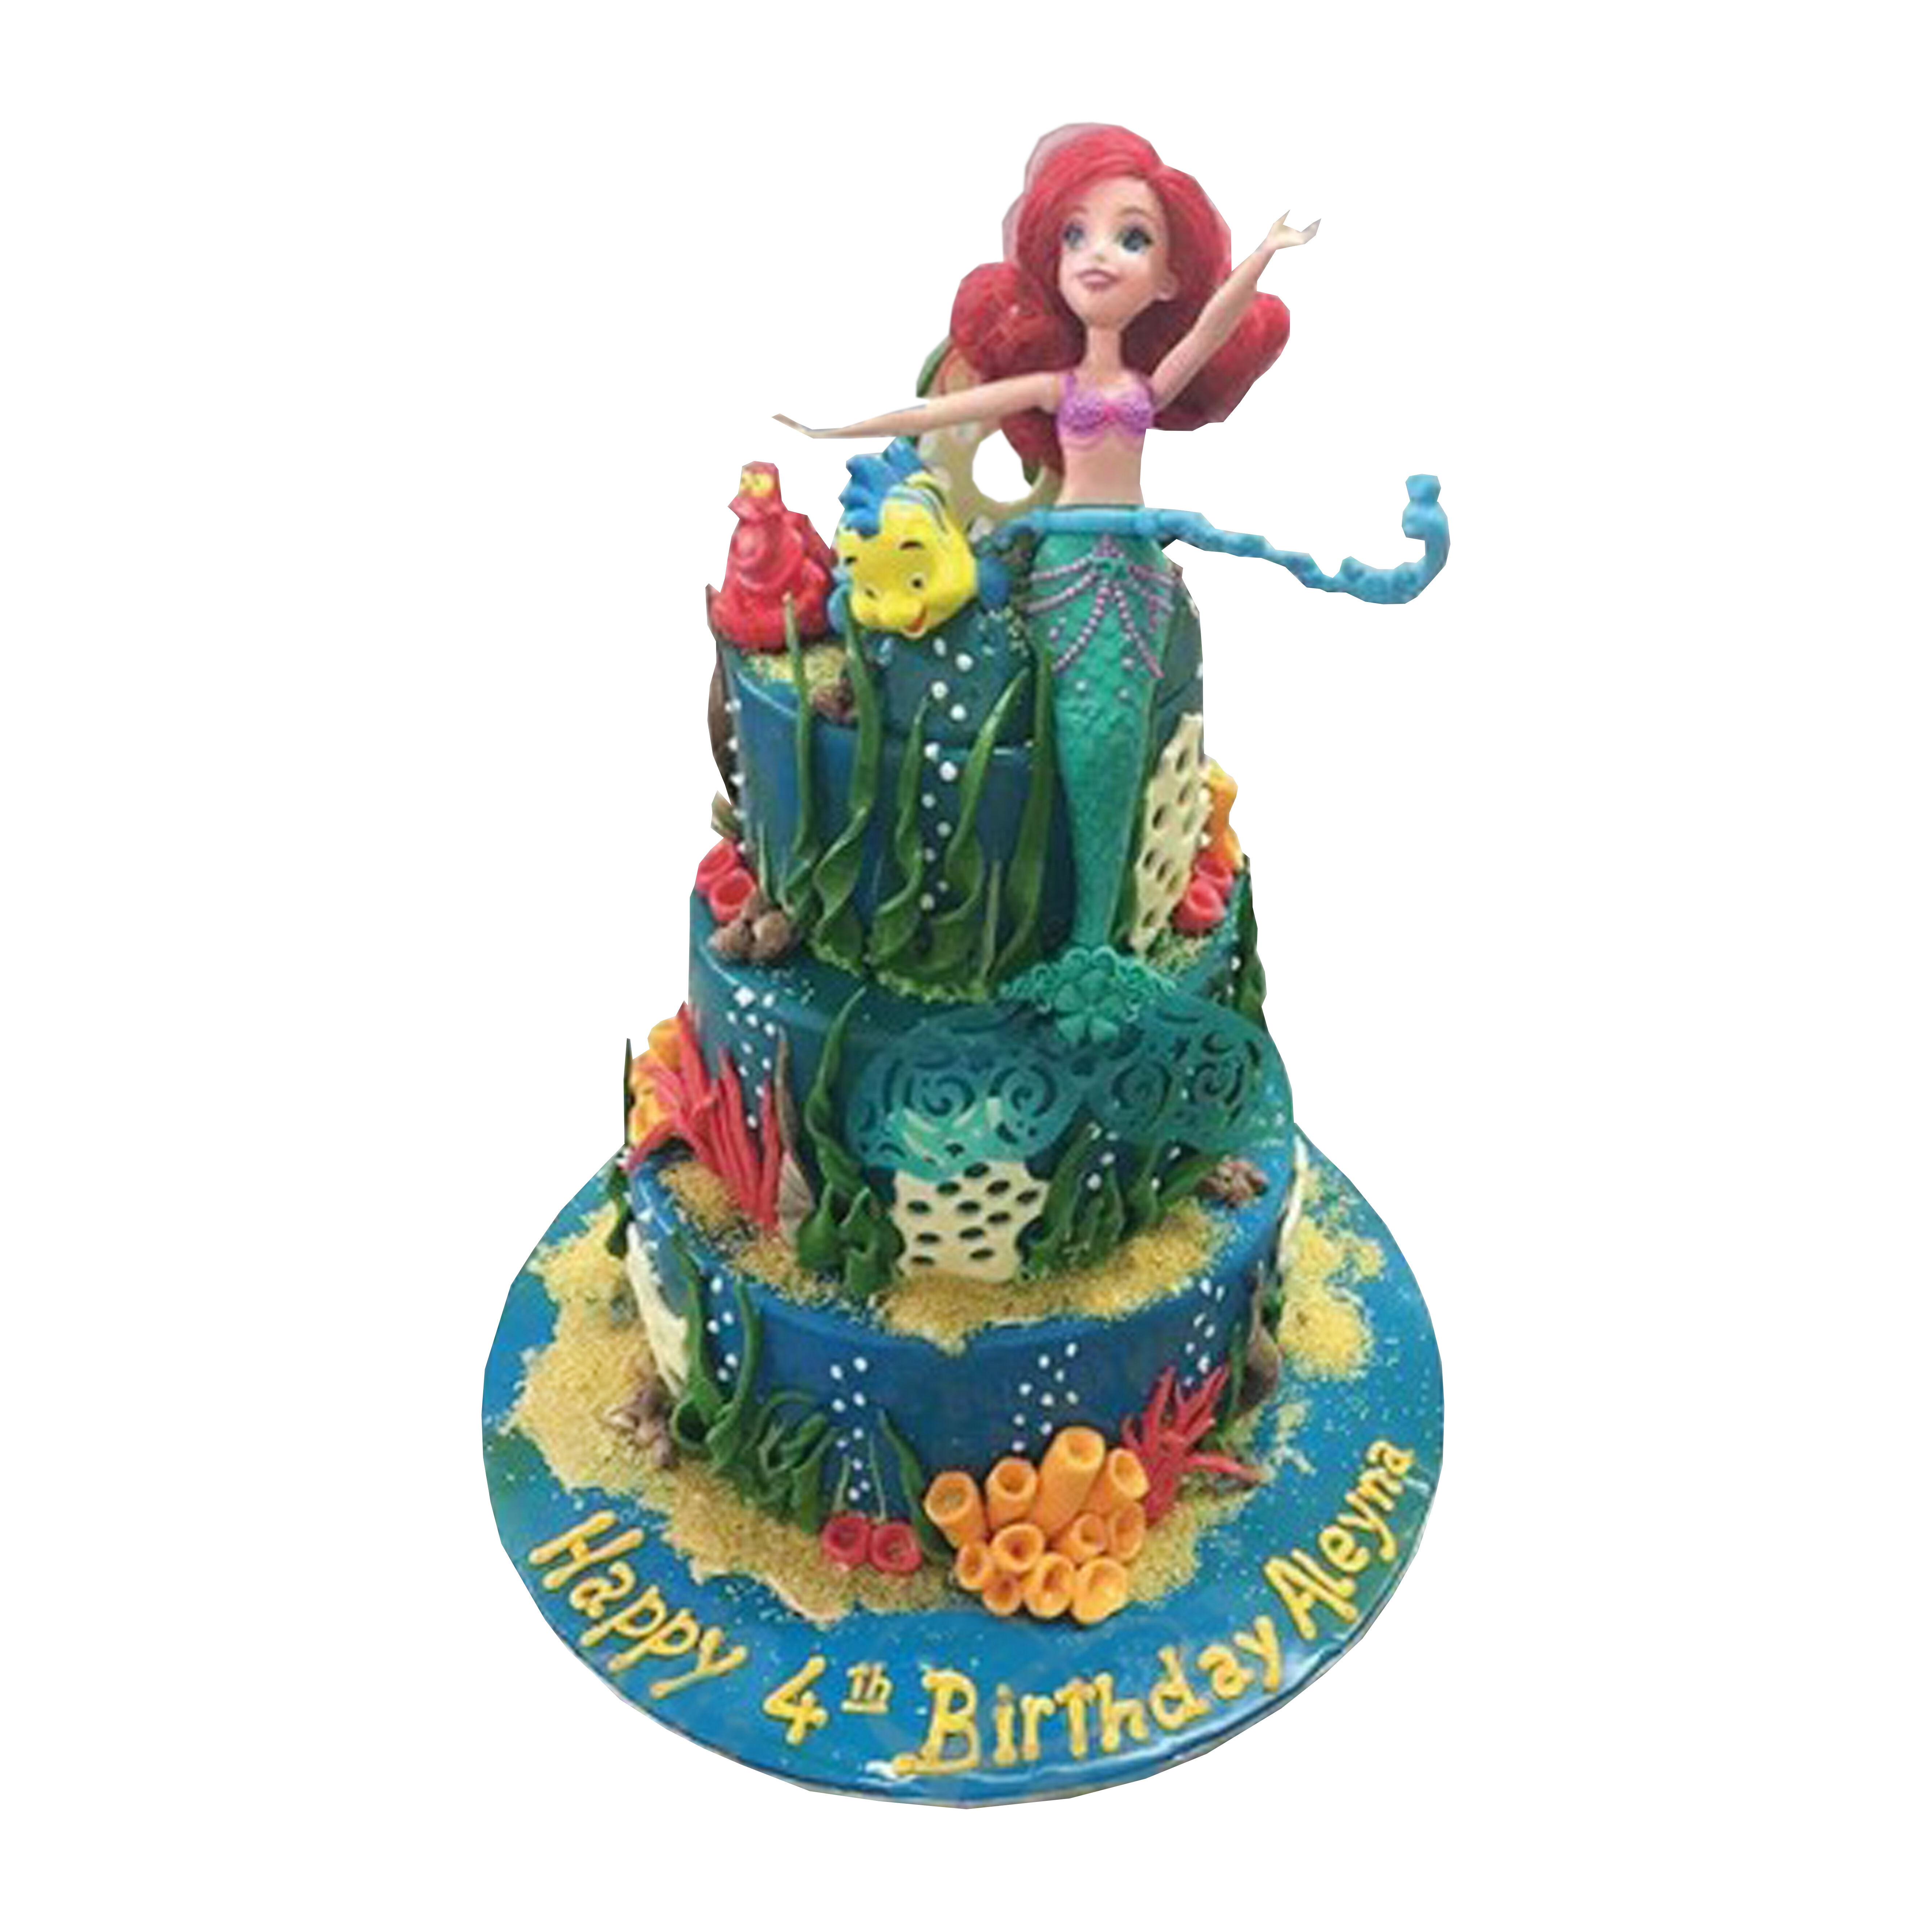 Mermaid Cake without Fondant (Easy Tutorial) - Spices N Flavors